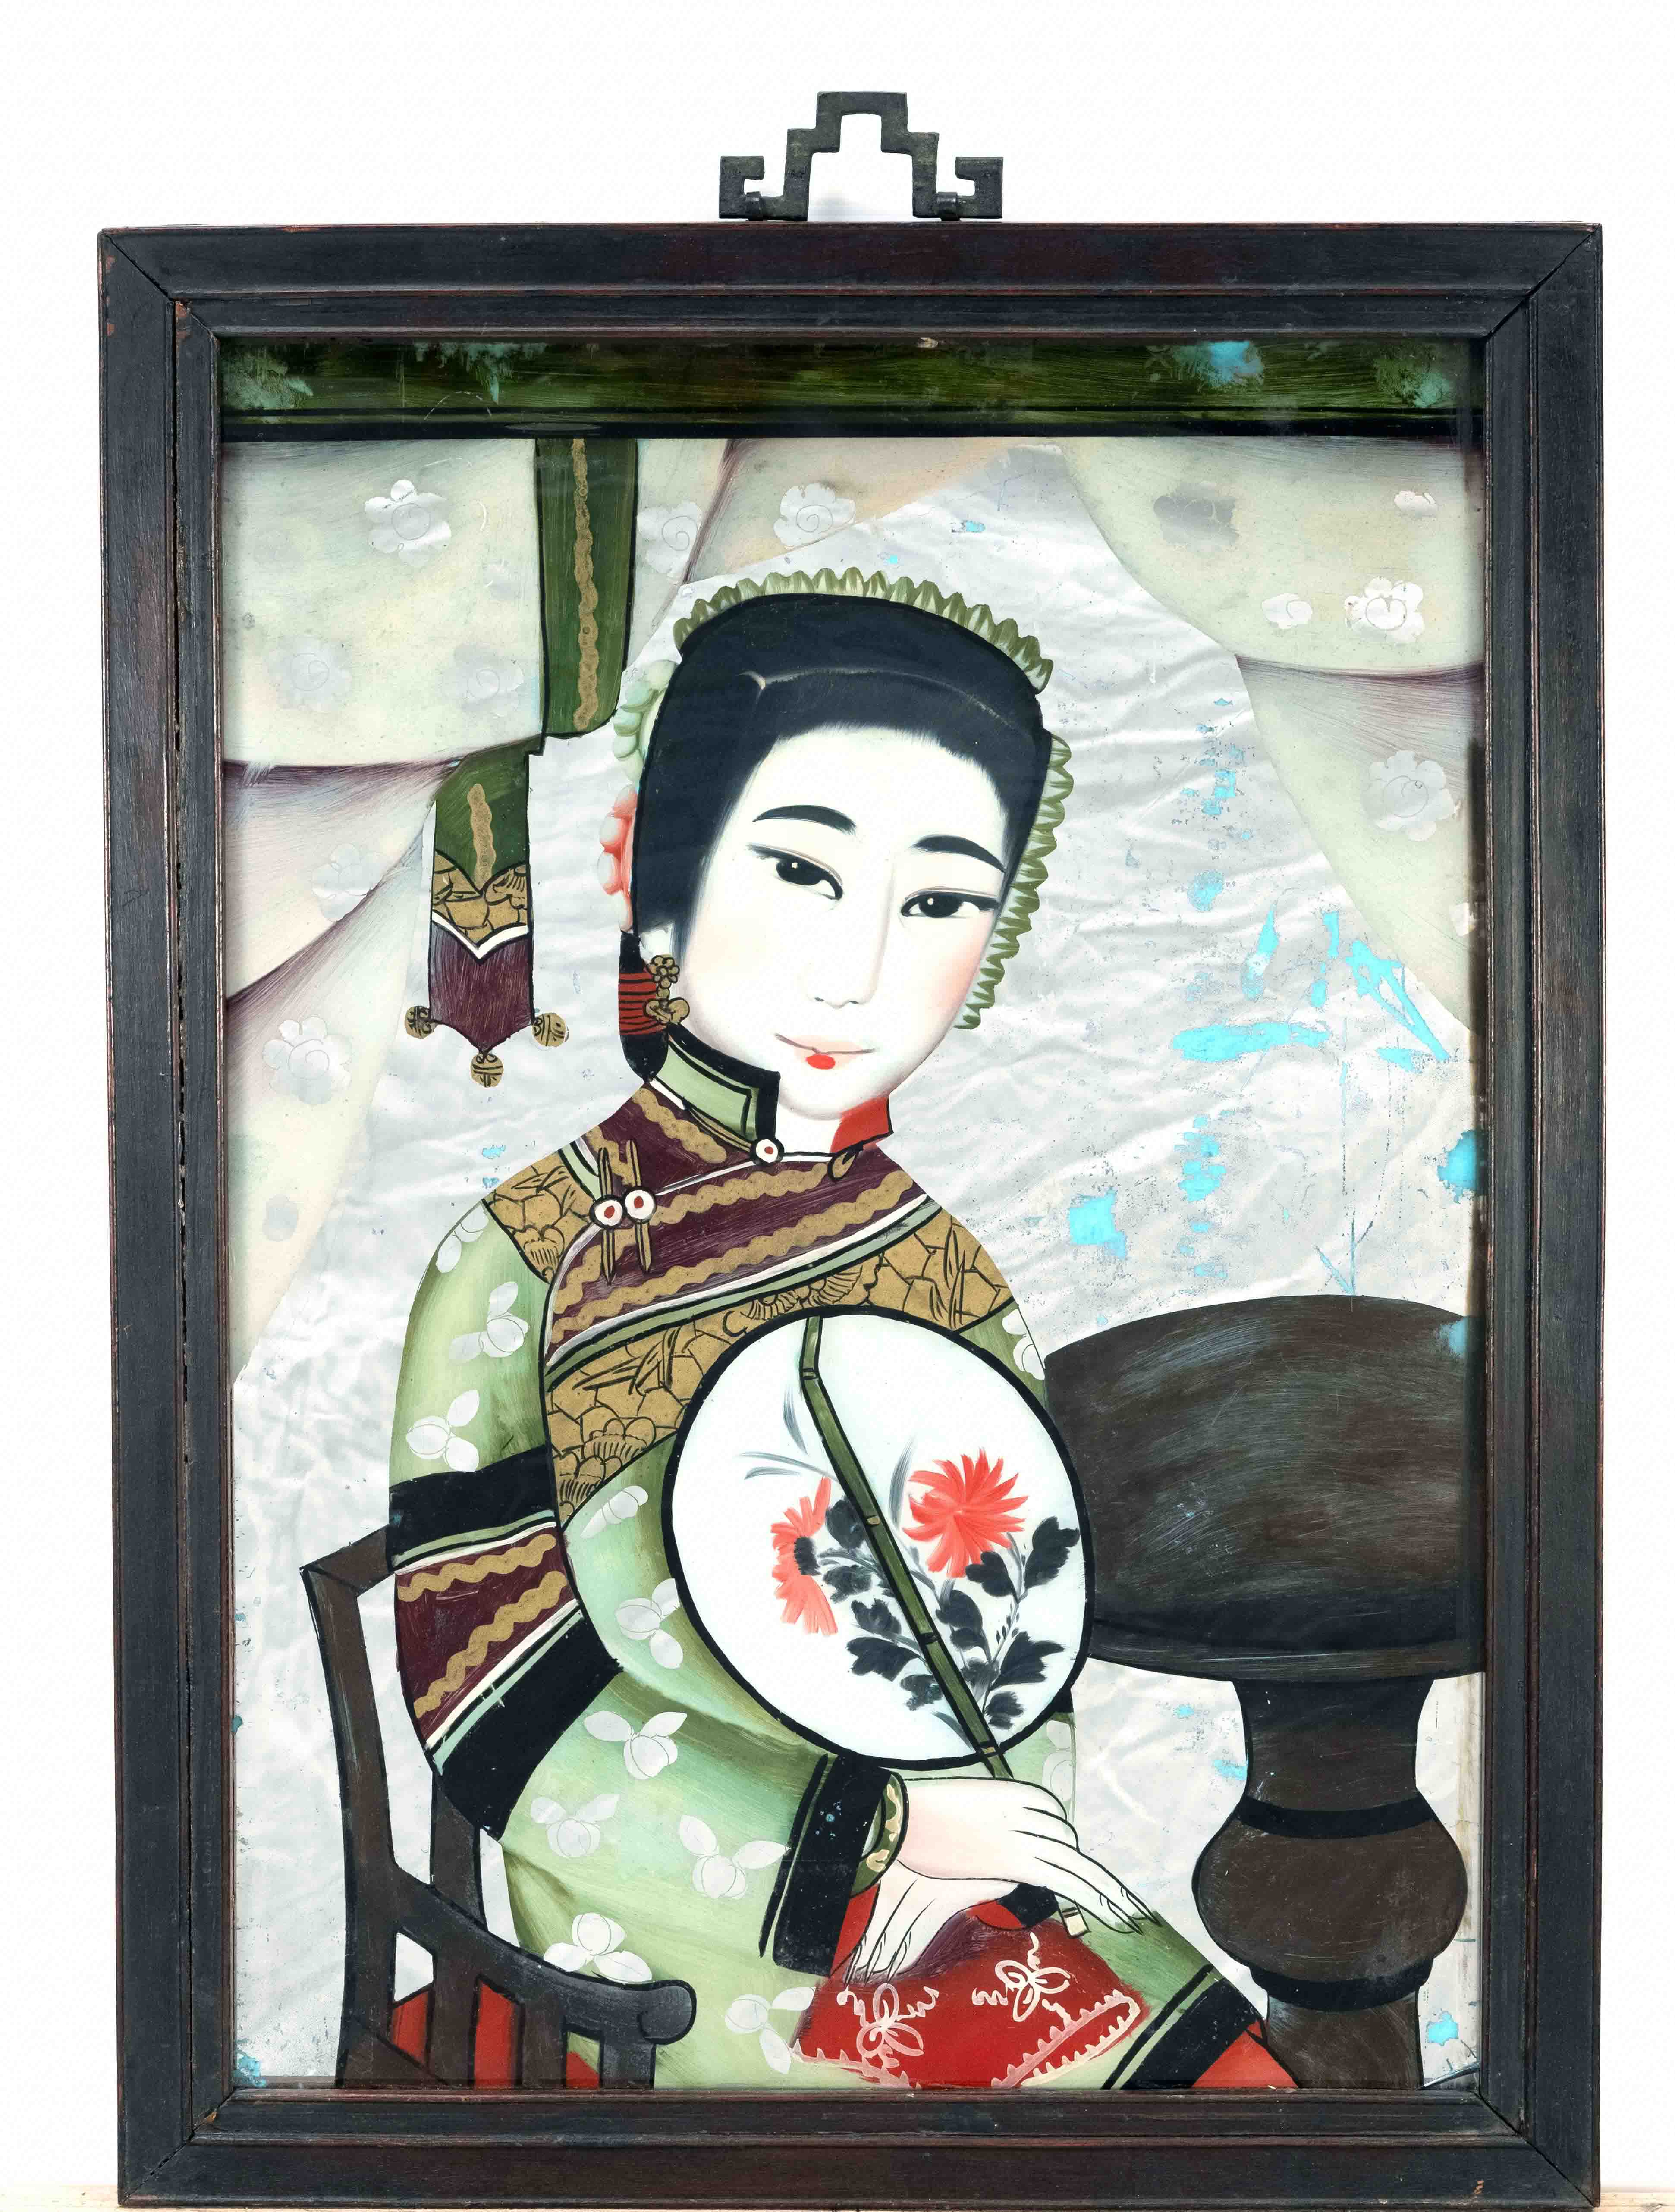 Mirror painting ''The Qipao Lady with the Fan'', South China, probably Hong Kong, Qing Dynasty(